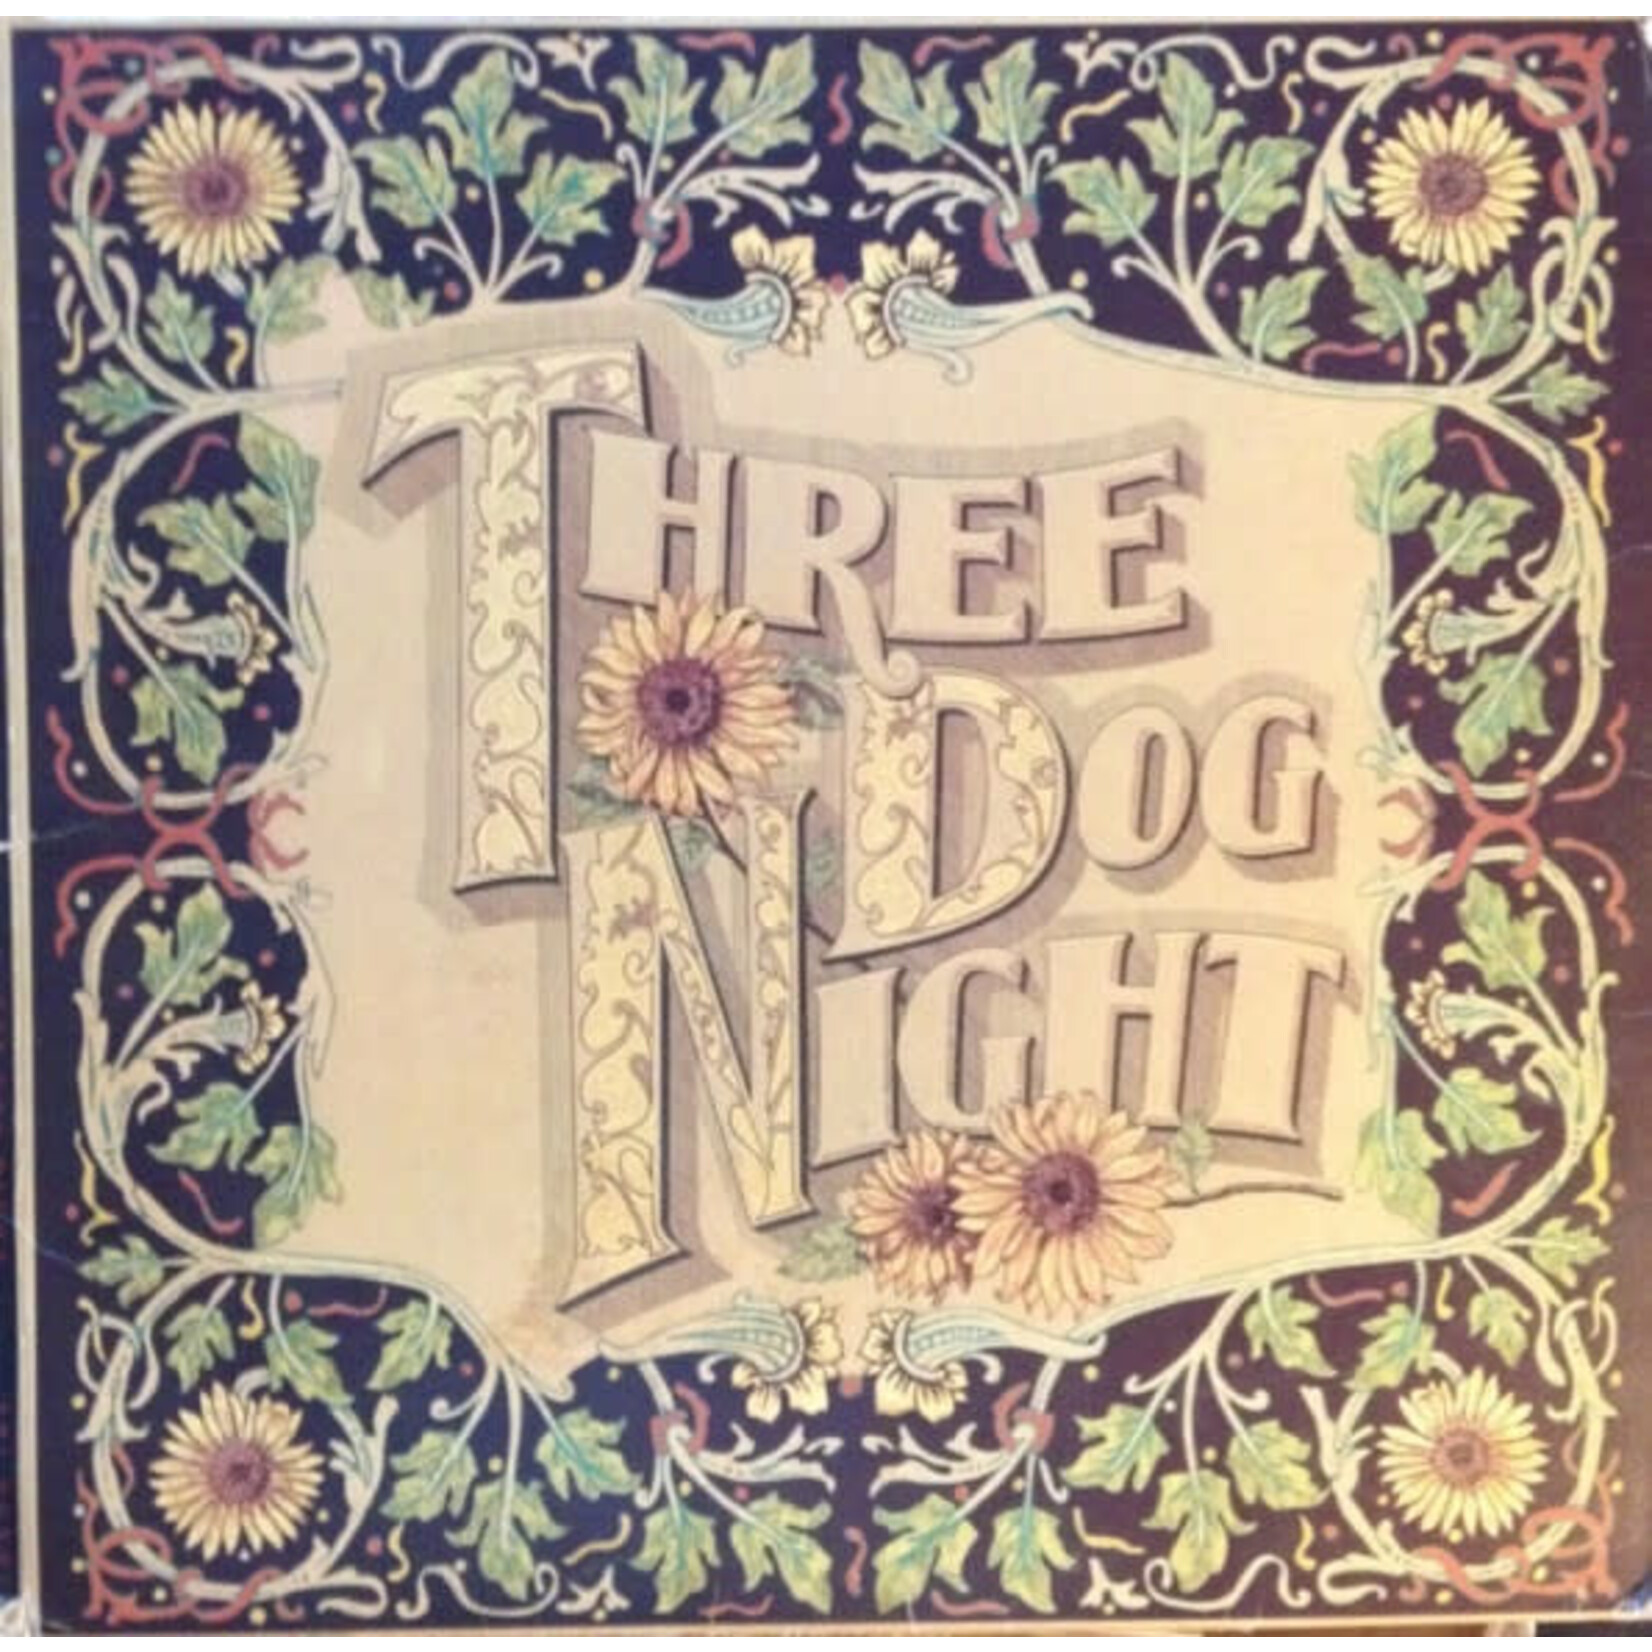 Three Dog Night Three Dog Night – Seven Separate Fools (G+, 1972, LP, With "7 Cards" Inserts, ABC/Dunhill Records – DSD-50118)